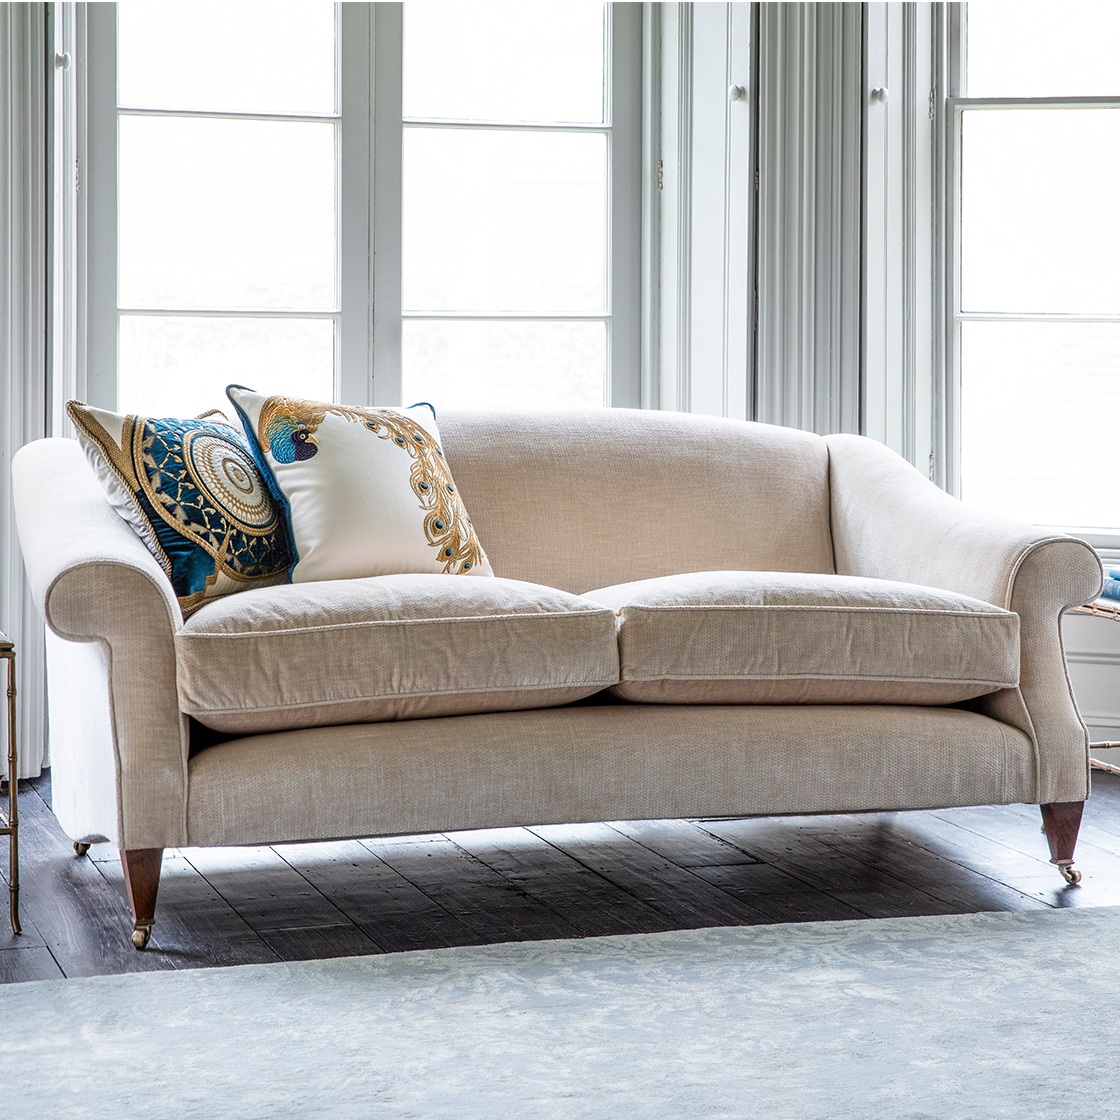 Masefield sofa in Troilus - Parchment with Pavo and Ettore cushions - Beaumont & Fletcher